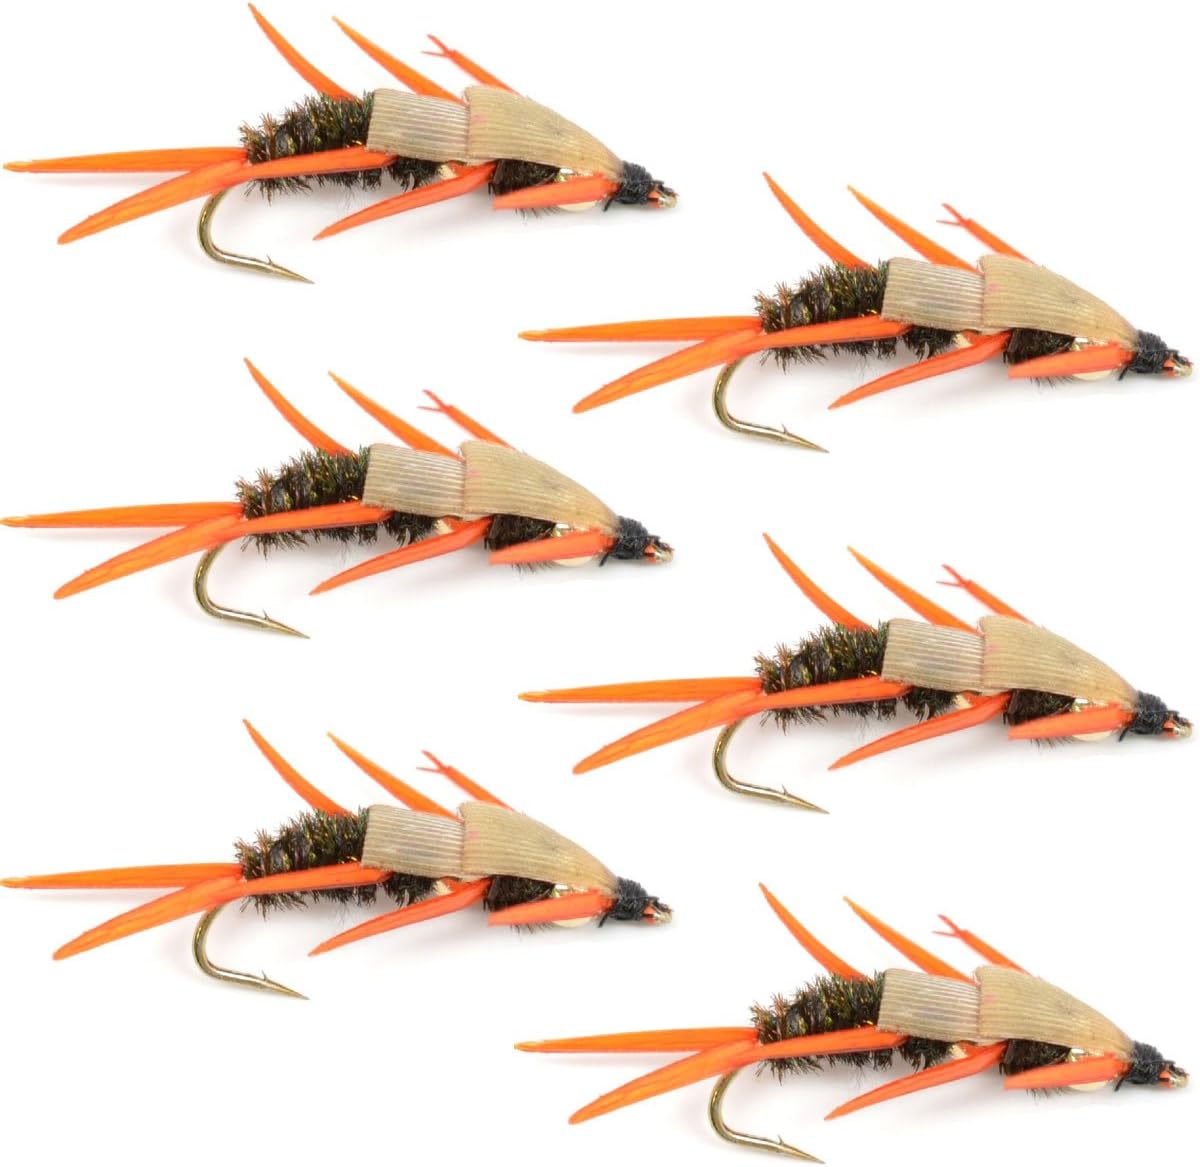 Double Bead Peacock Stonefly Nymph with Amber Biot Legs Fly Fishing Flies - 6 Flies Hook Size 8